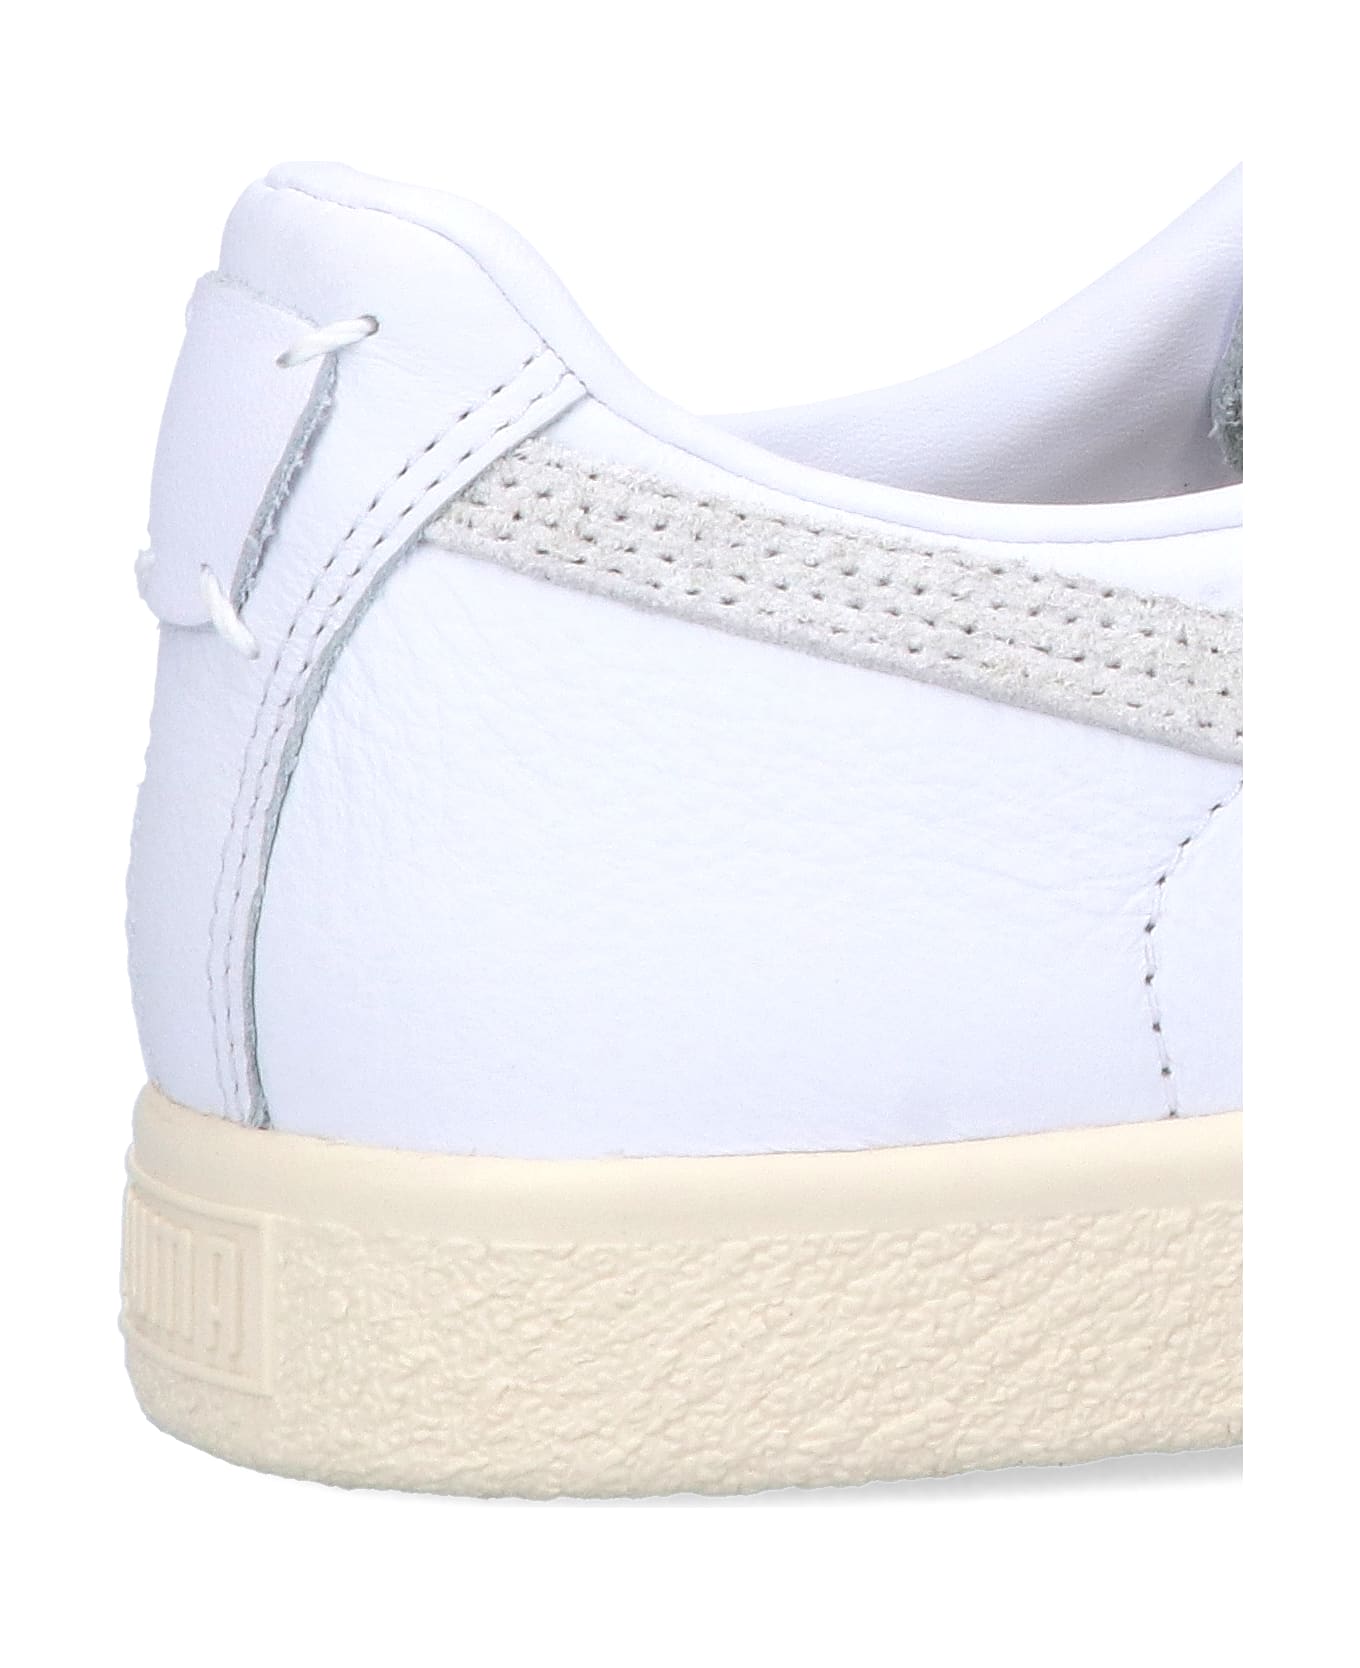 Puma 'clyde' Sneakers - White